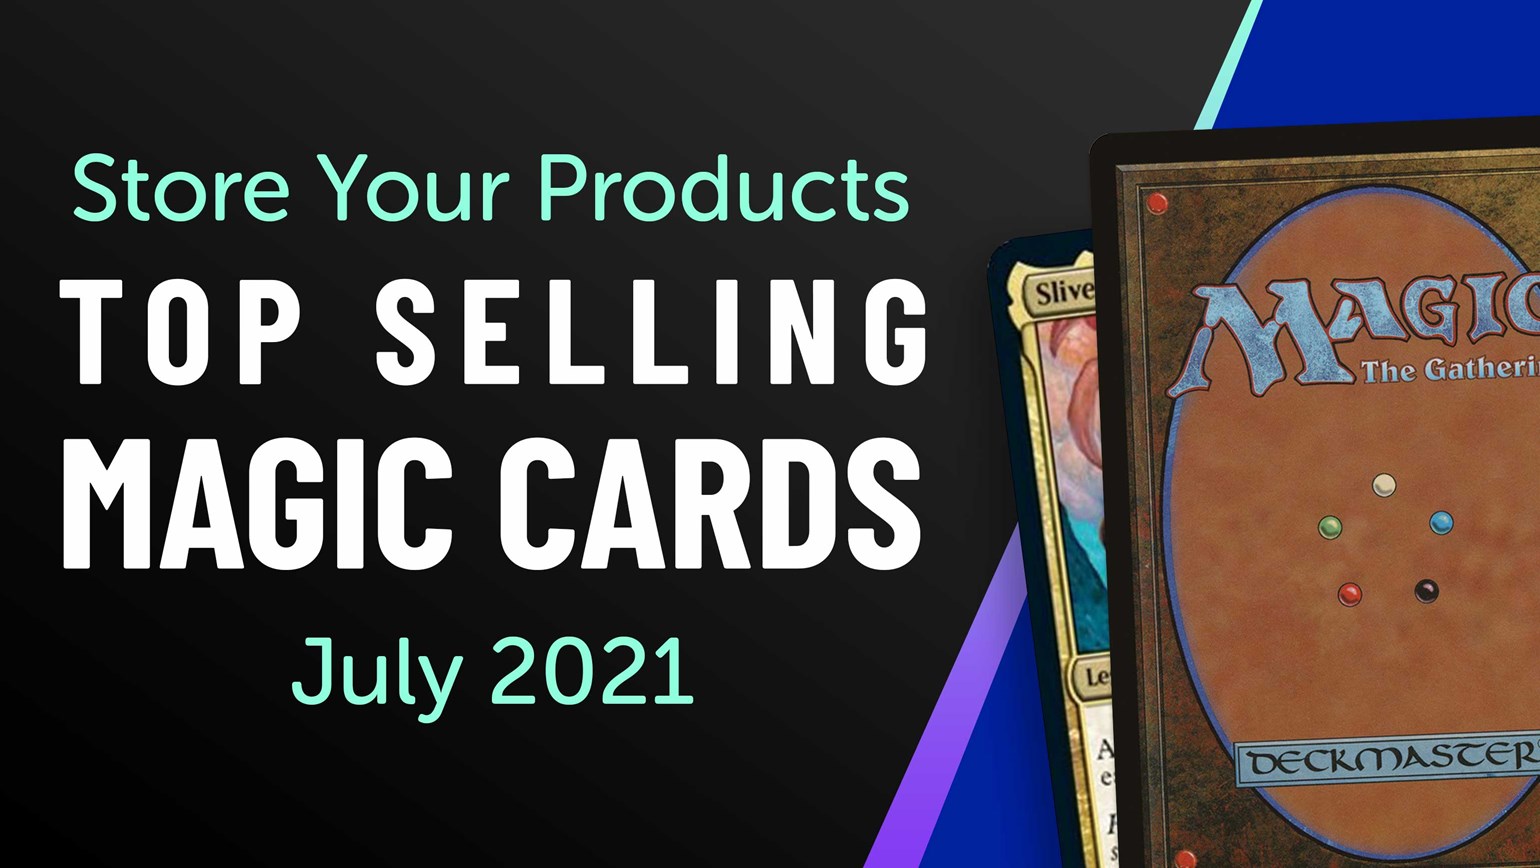 Top Selling Magic: The Gathering Cards in Store Your Products Under $25: July 2021